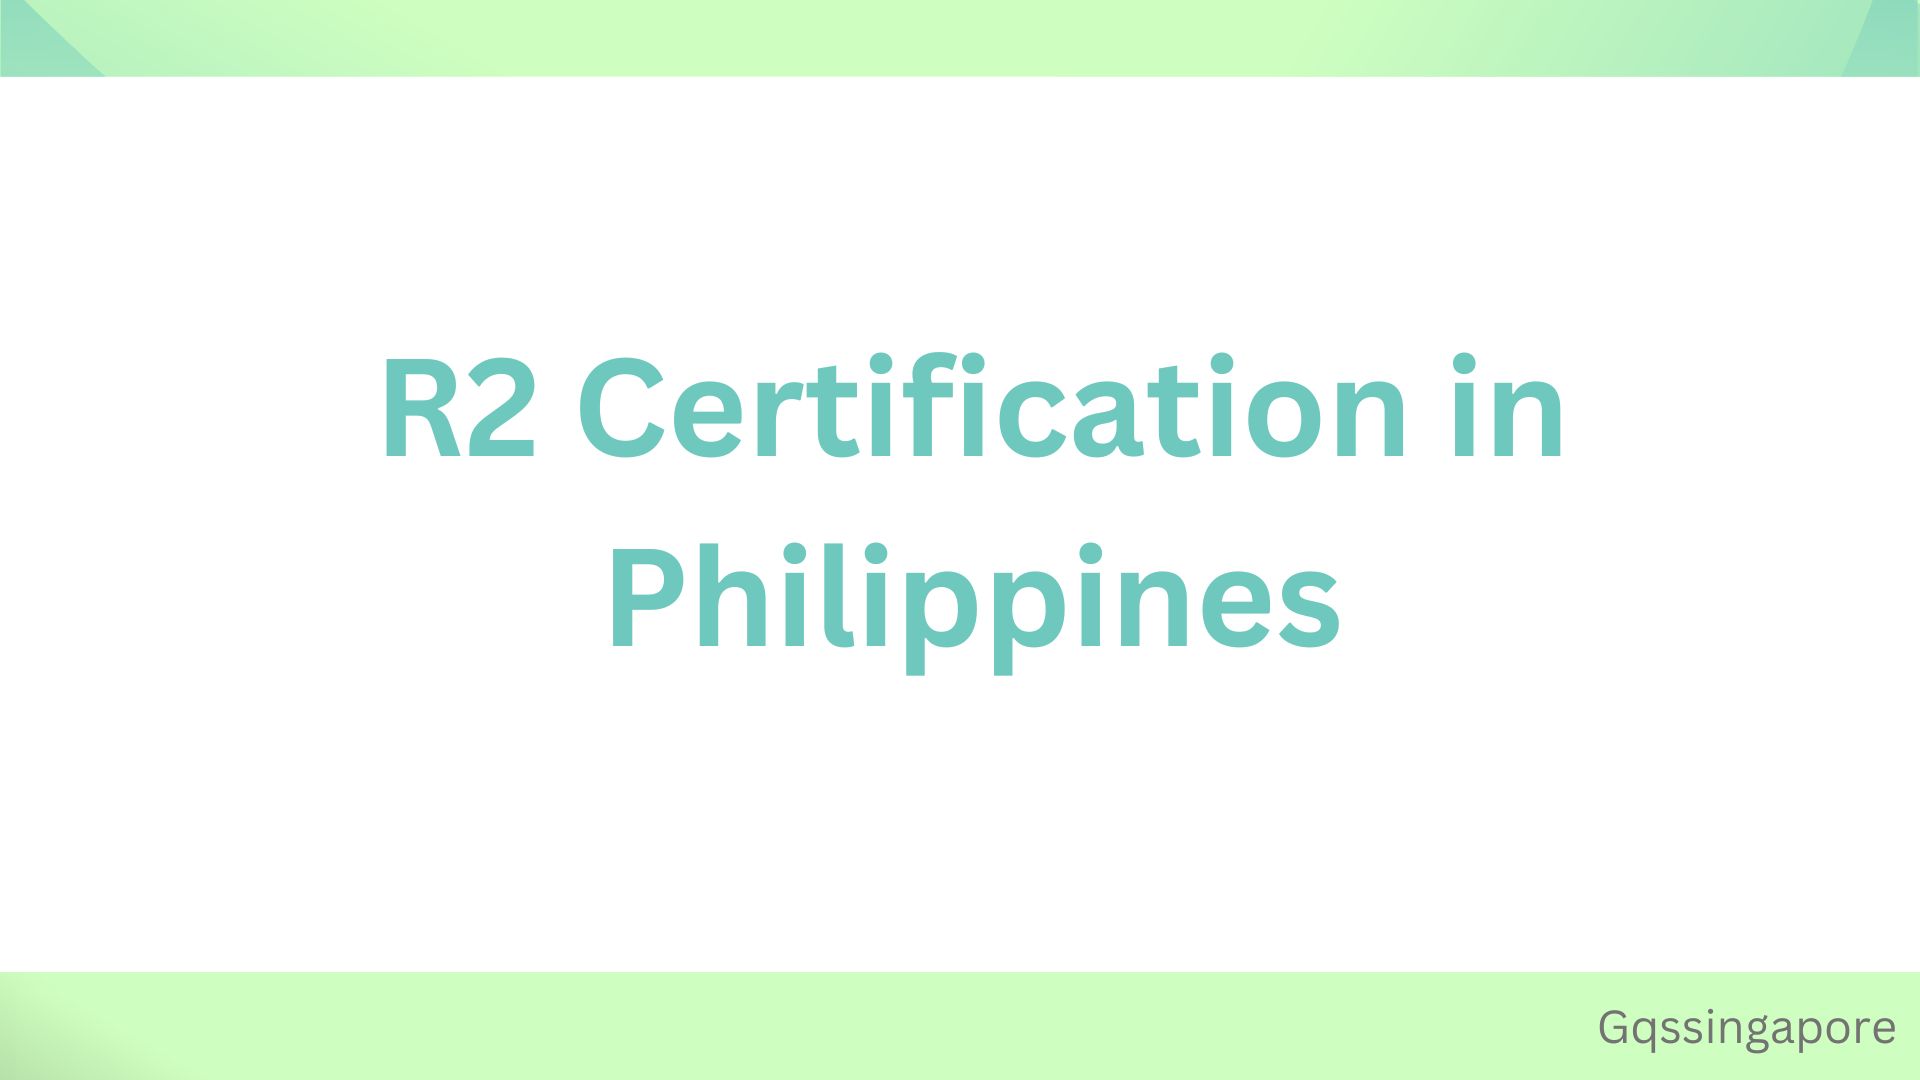 R2 Certification in Philippines